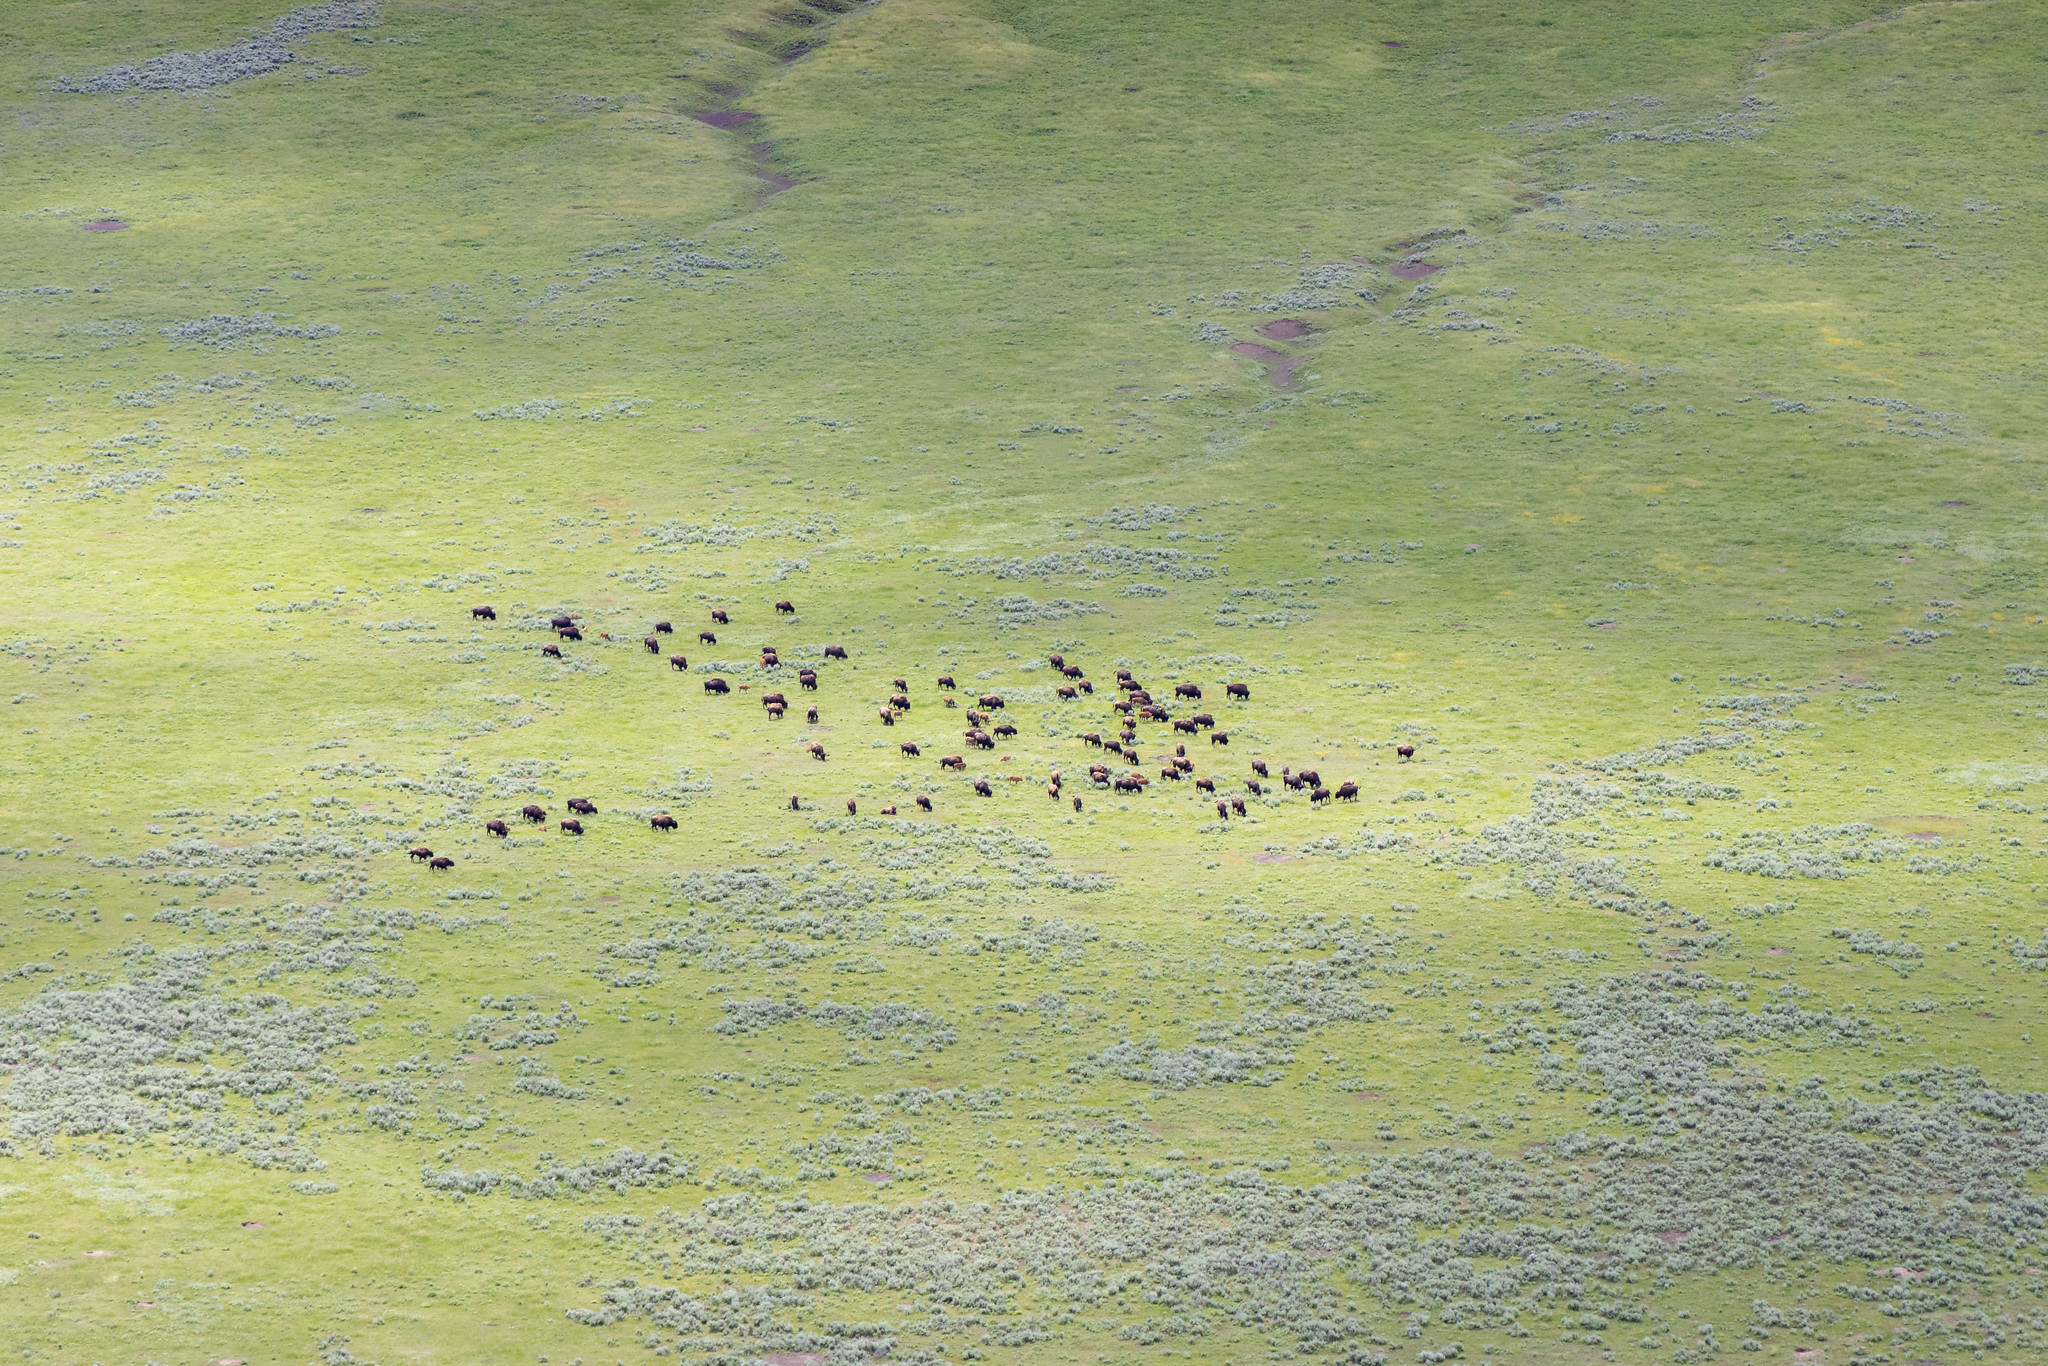 Aerial photo of a herd of bison on green grass.